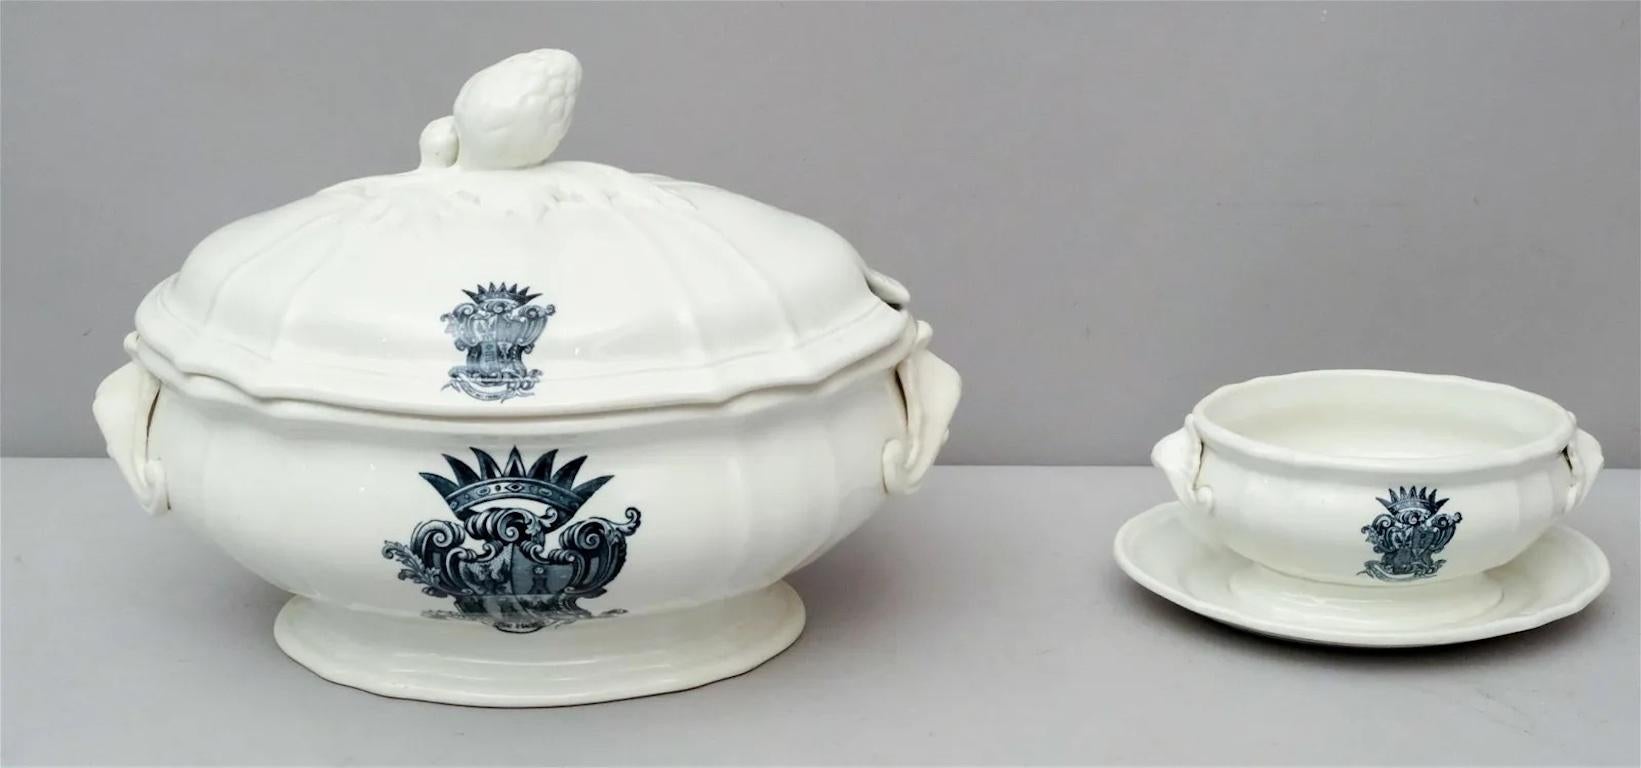 Baroque Revival 19th Century Ginori Armorial Porcelain Serving Pieces Platters and Tureen For Sale